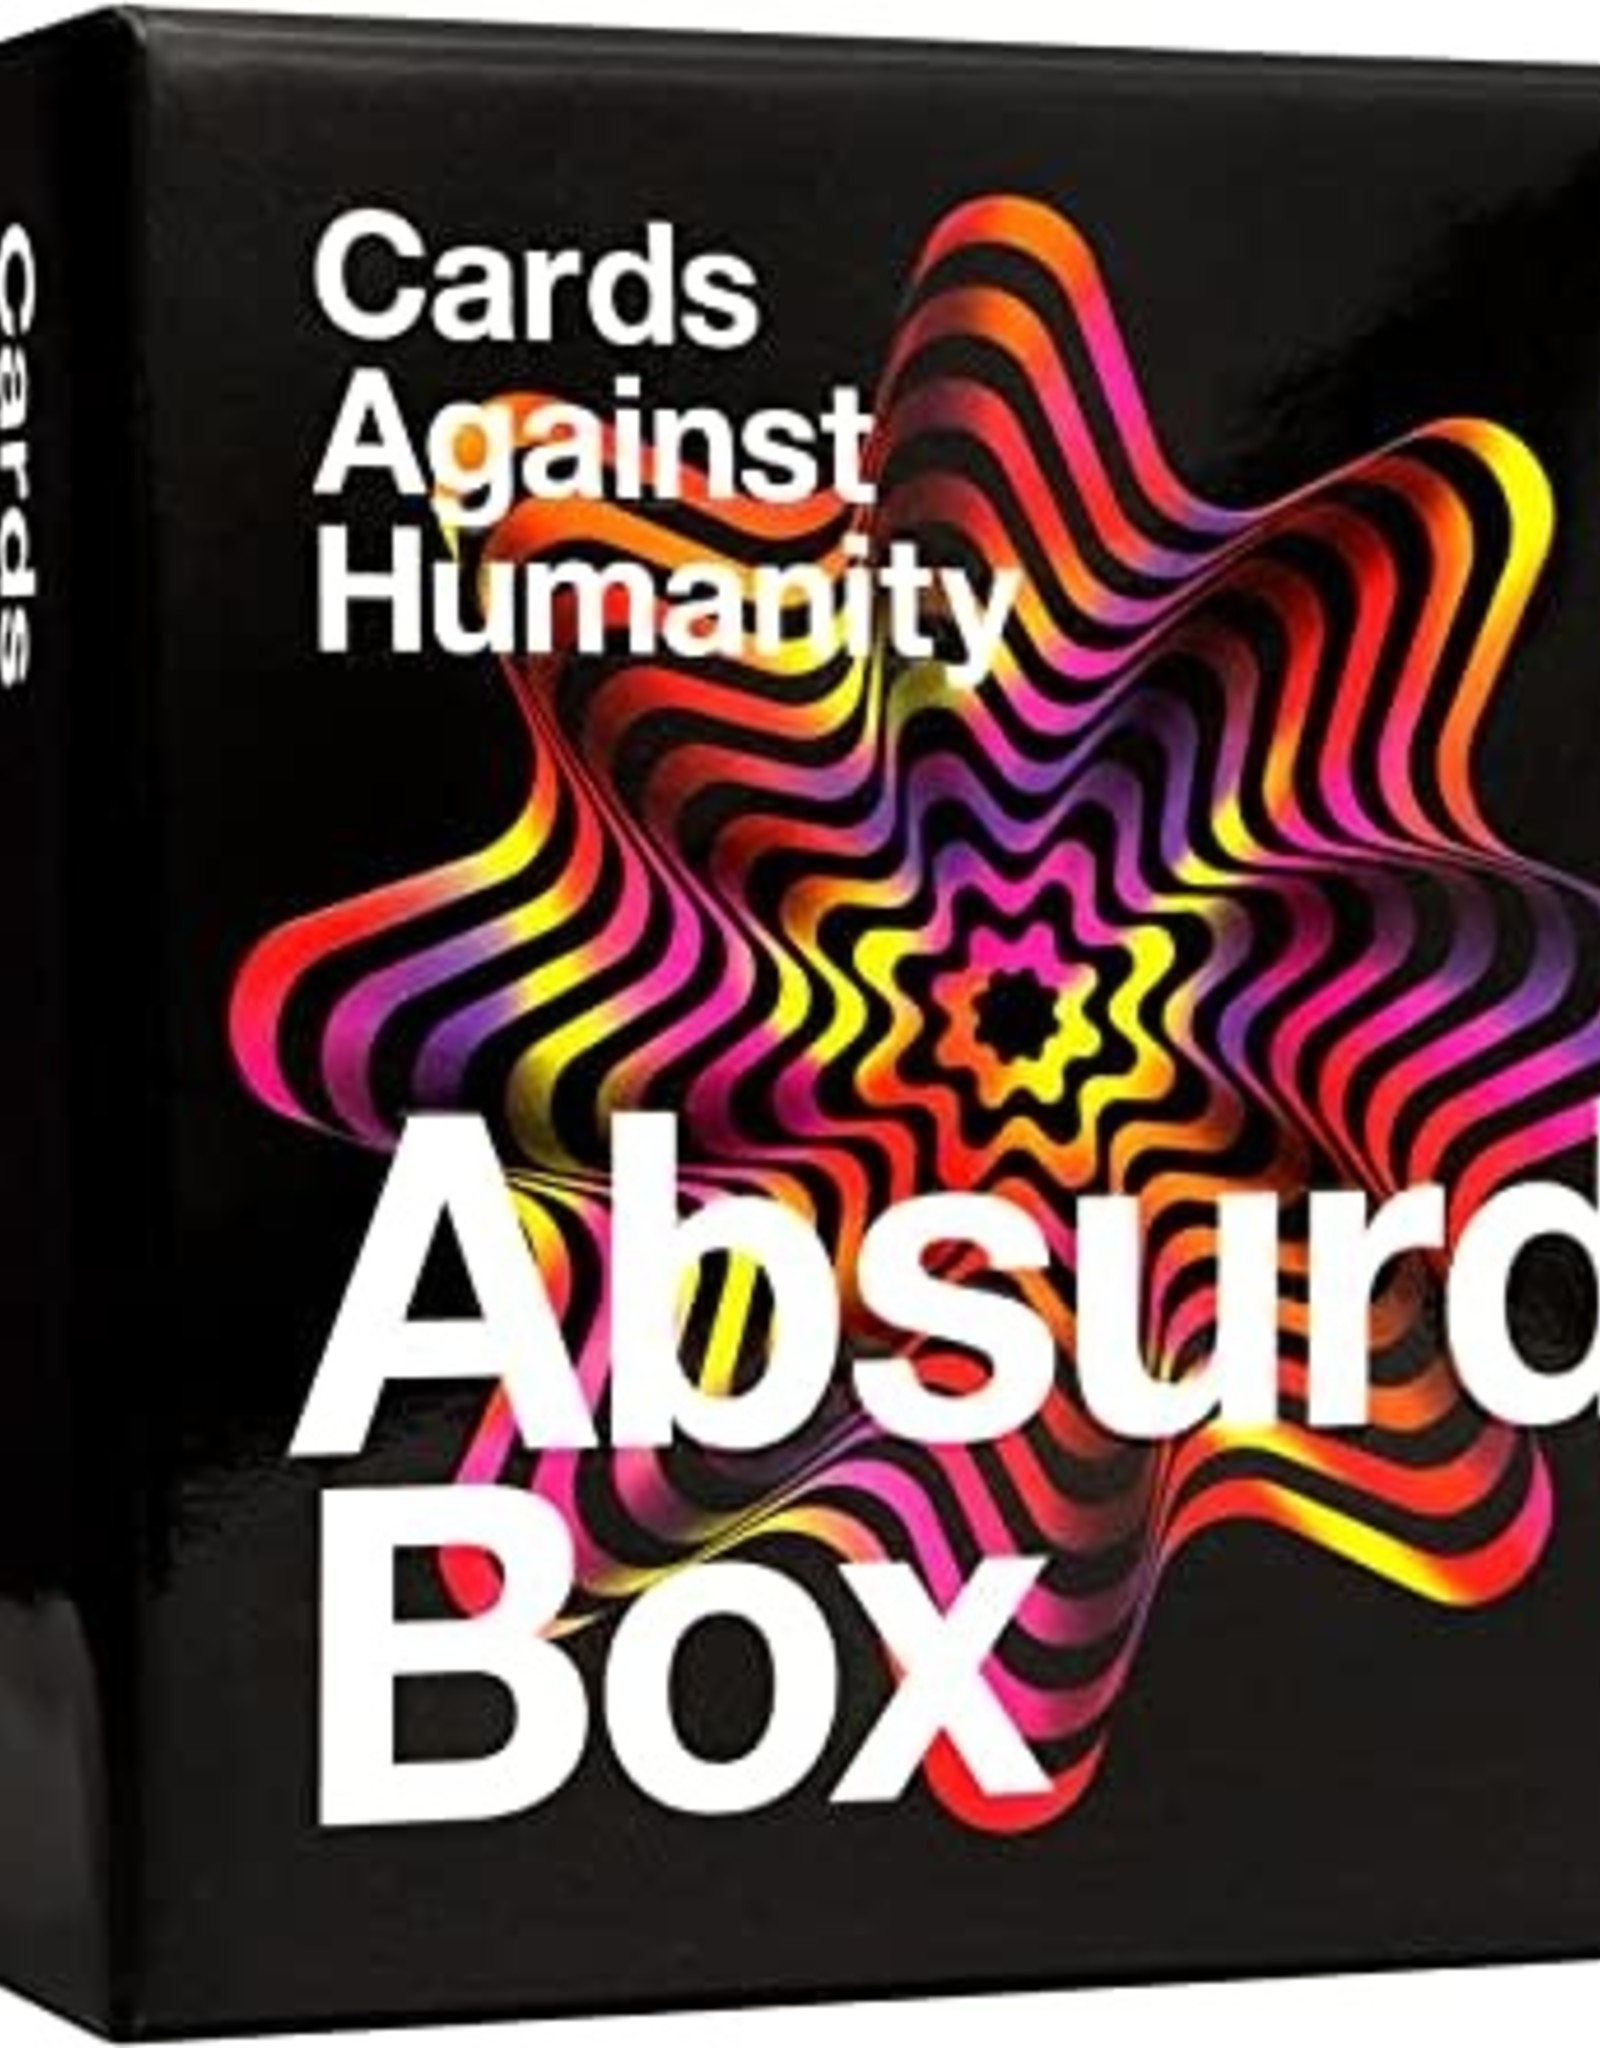 CARDS AGAINST HUMANITY (ABSURD BOX)